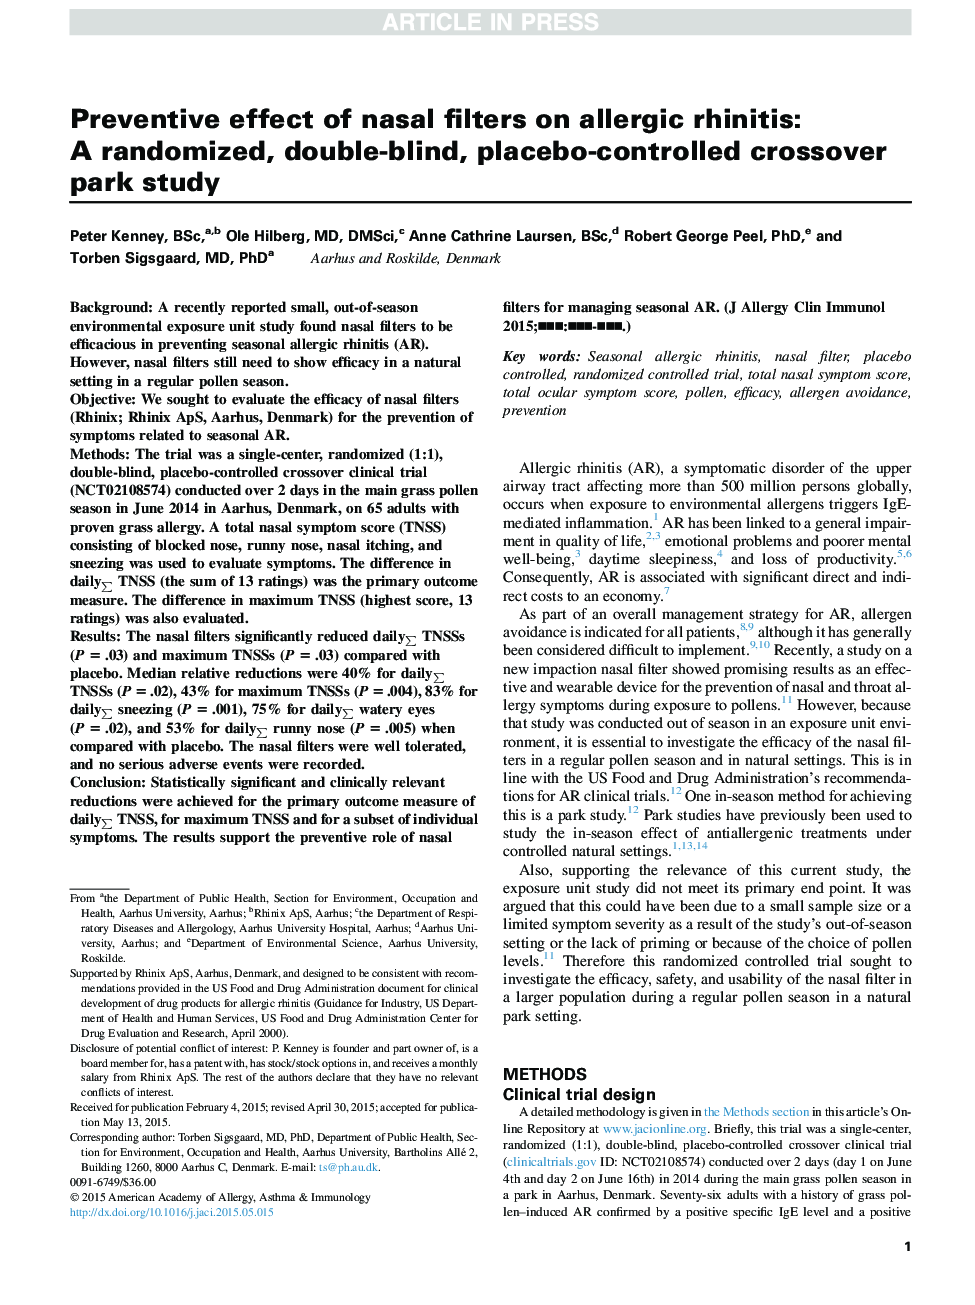 Preventive effect of nasal filters on allergic rhinitis: AÂ randomized, double-blind, placebo-controlled crossover park study